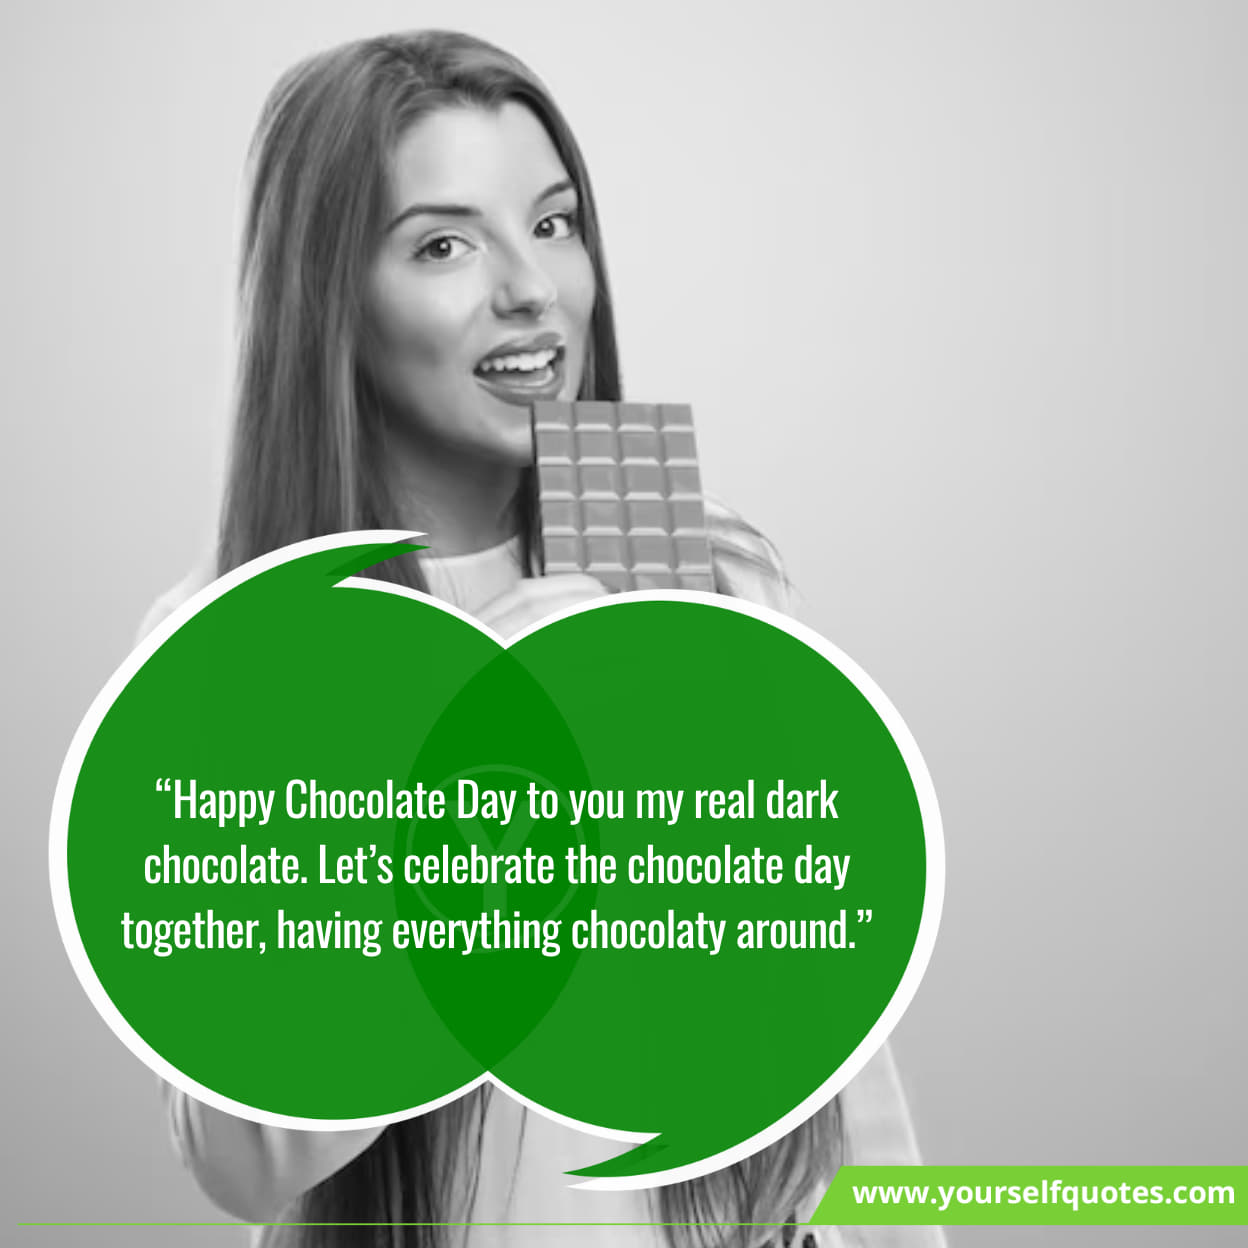 Happy Chocolate Day Quotes Wishes